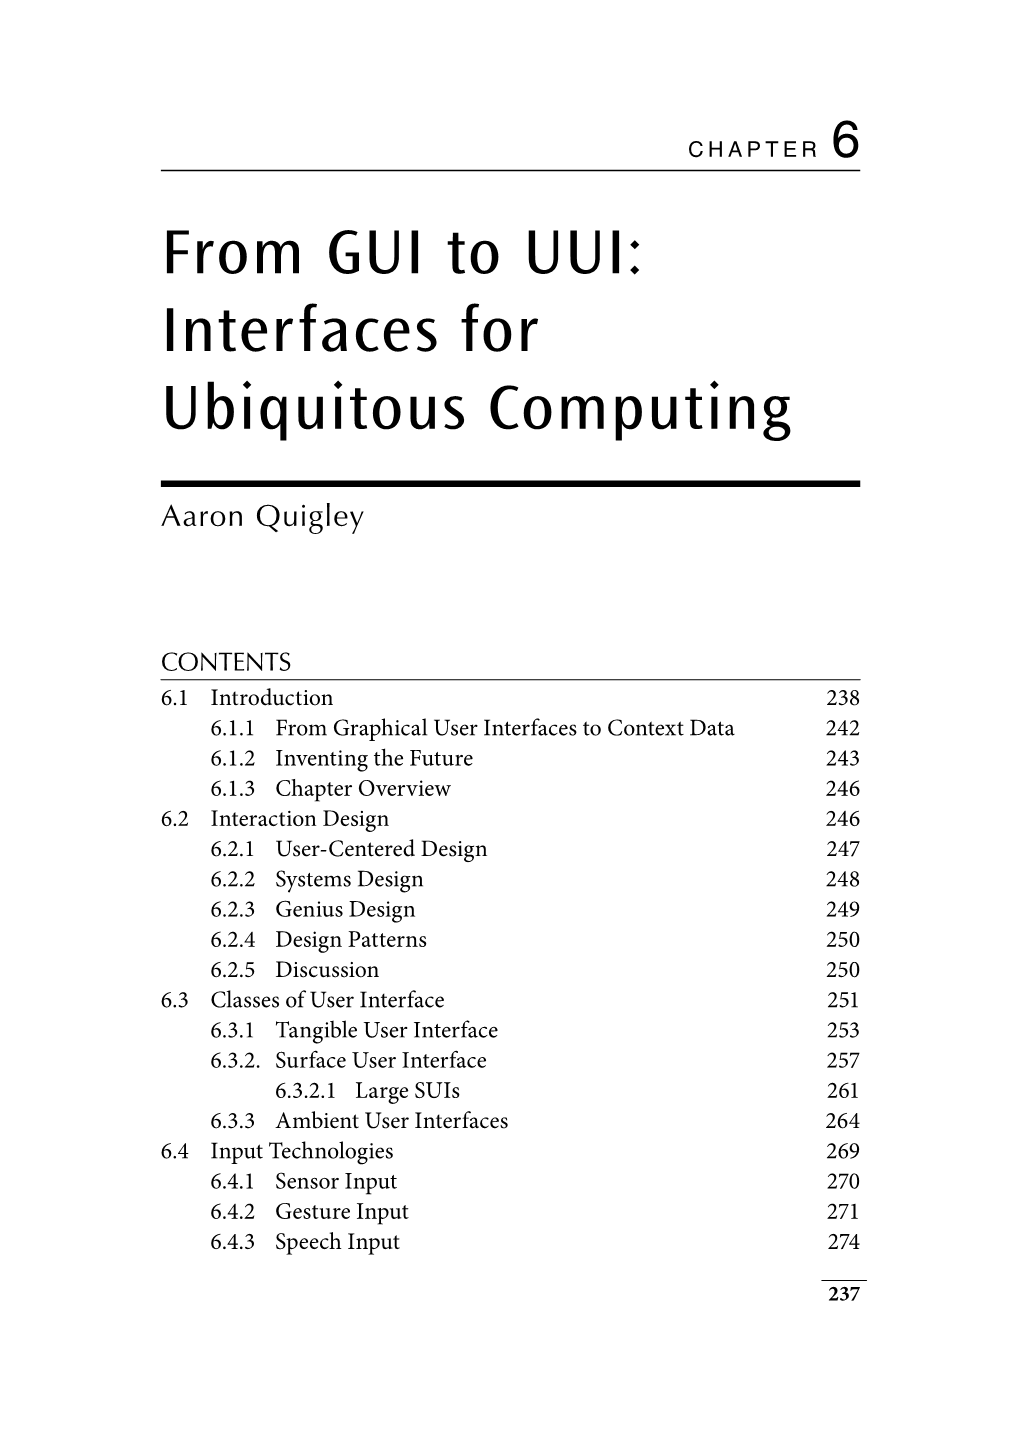 From GUI to UUI: Interfaces for Ubiquitous Computing